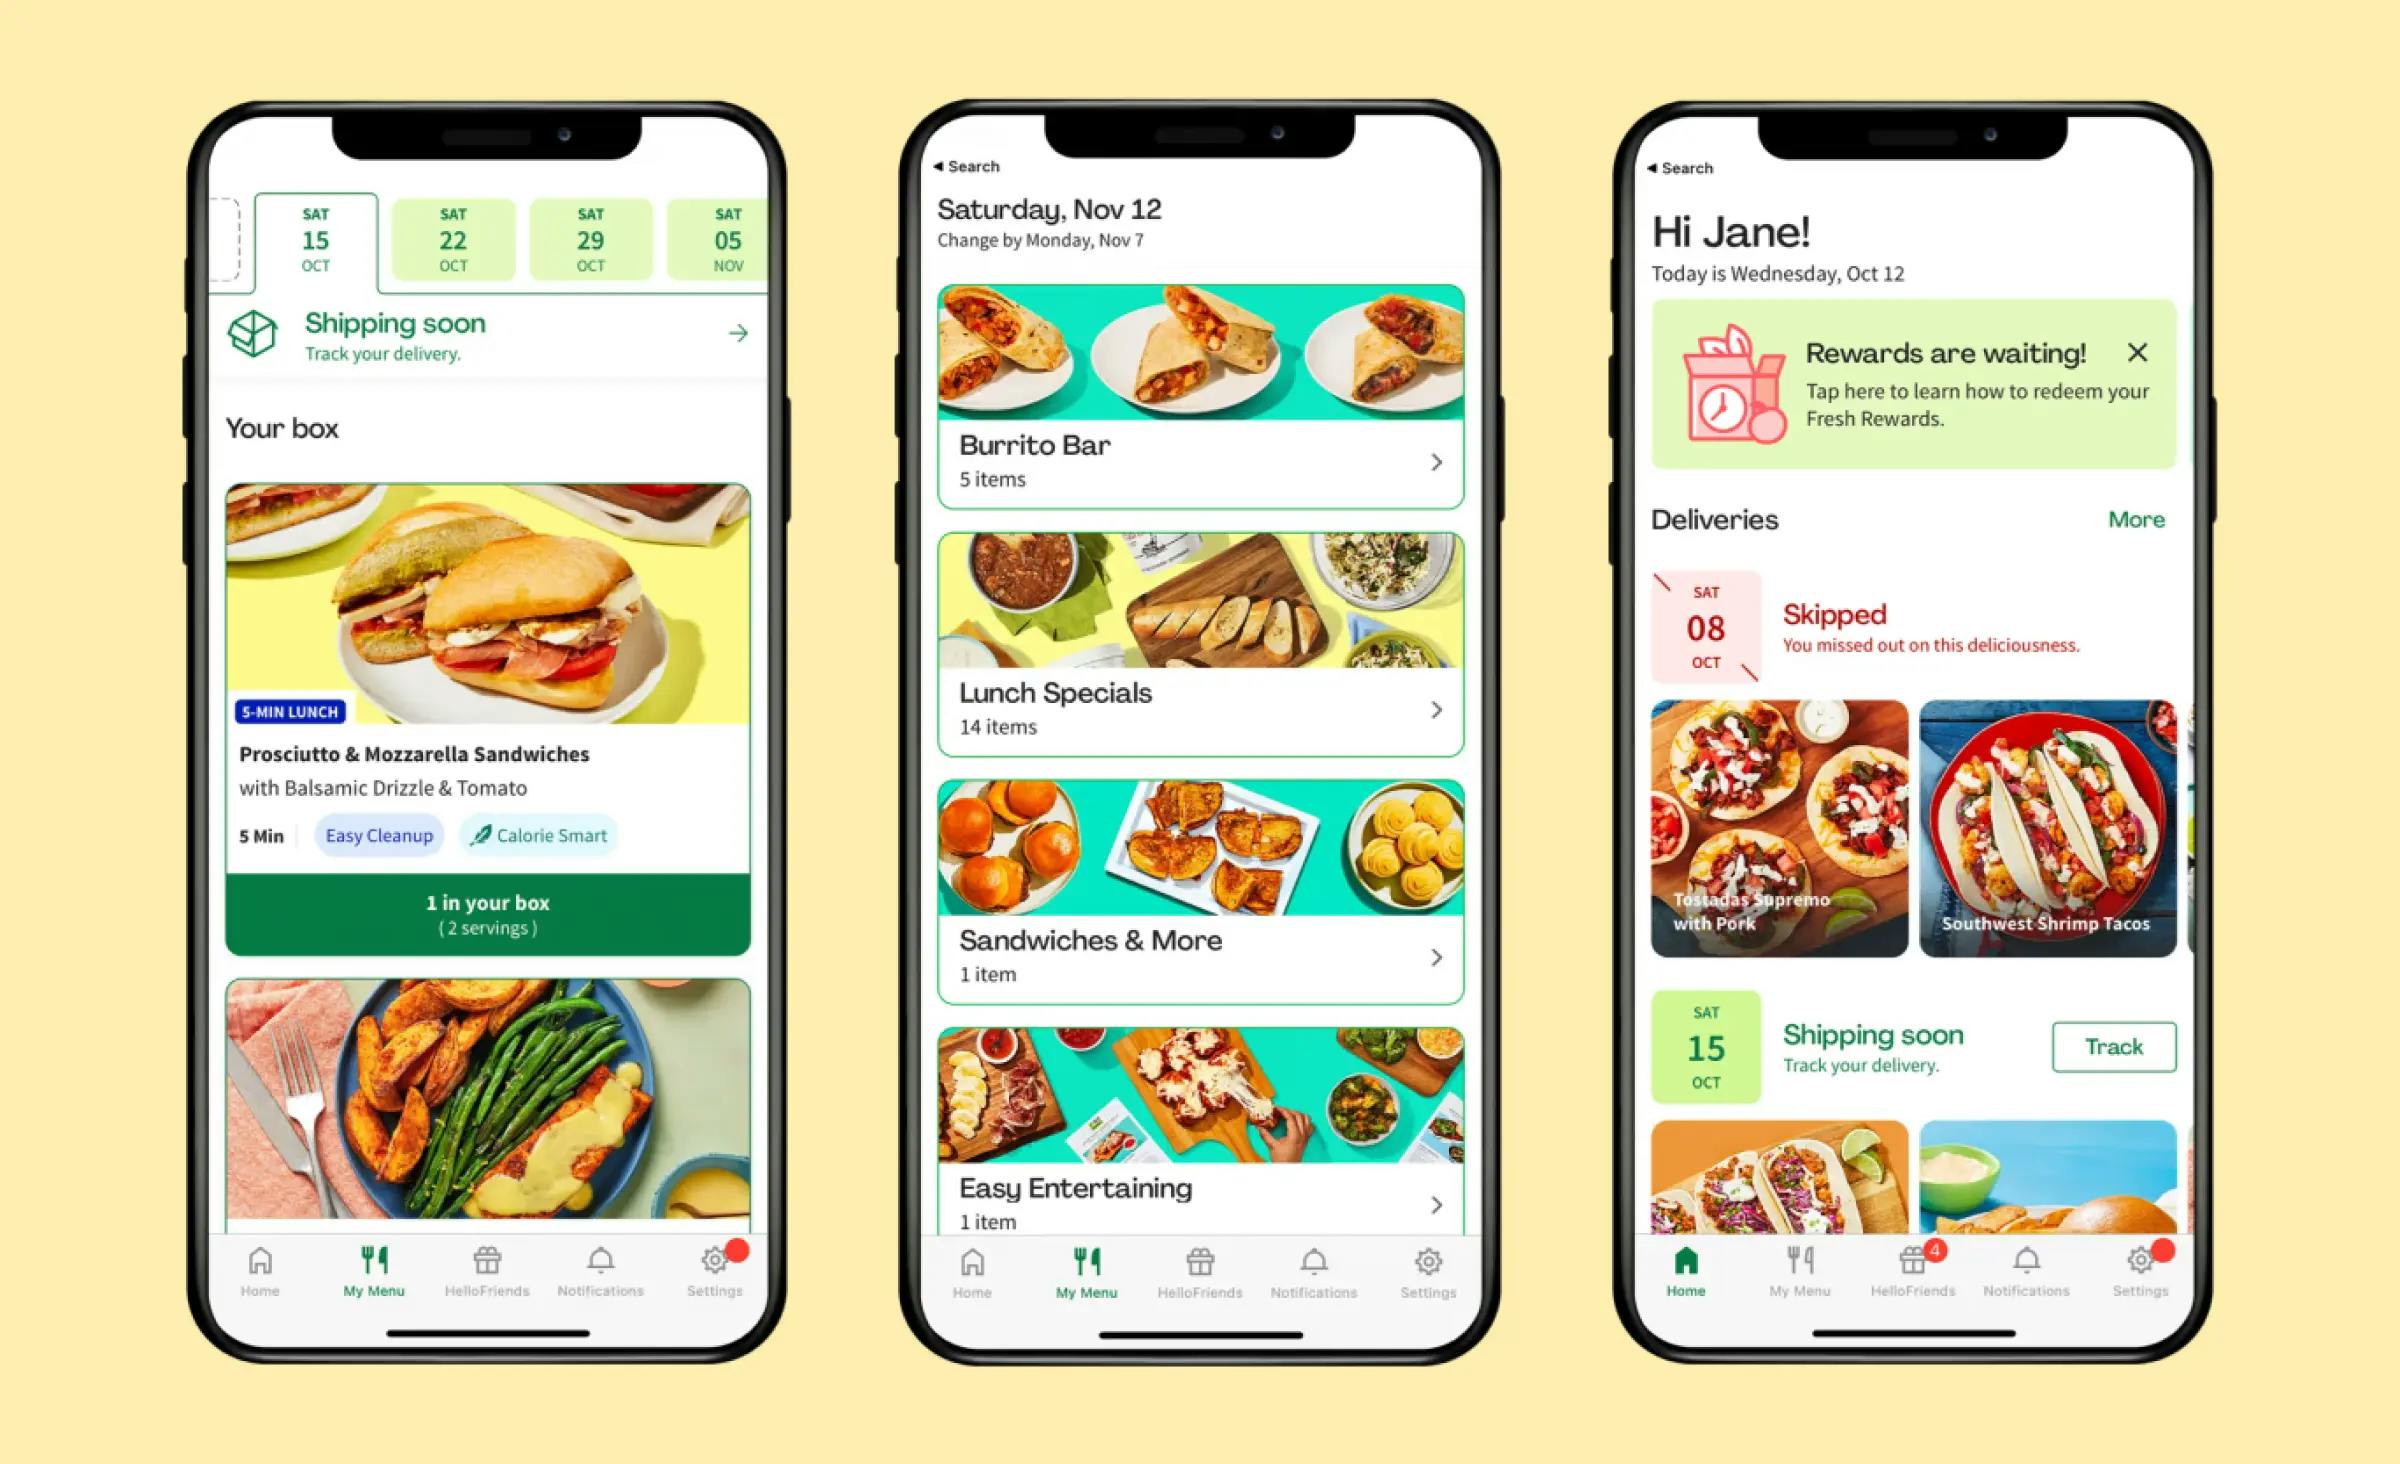 The image showcases three screens from the HelloFresh mobile application: a customer's box, menu categories, and a home page. This serves as a good example of grocery delivery app development.